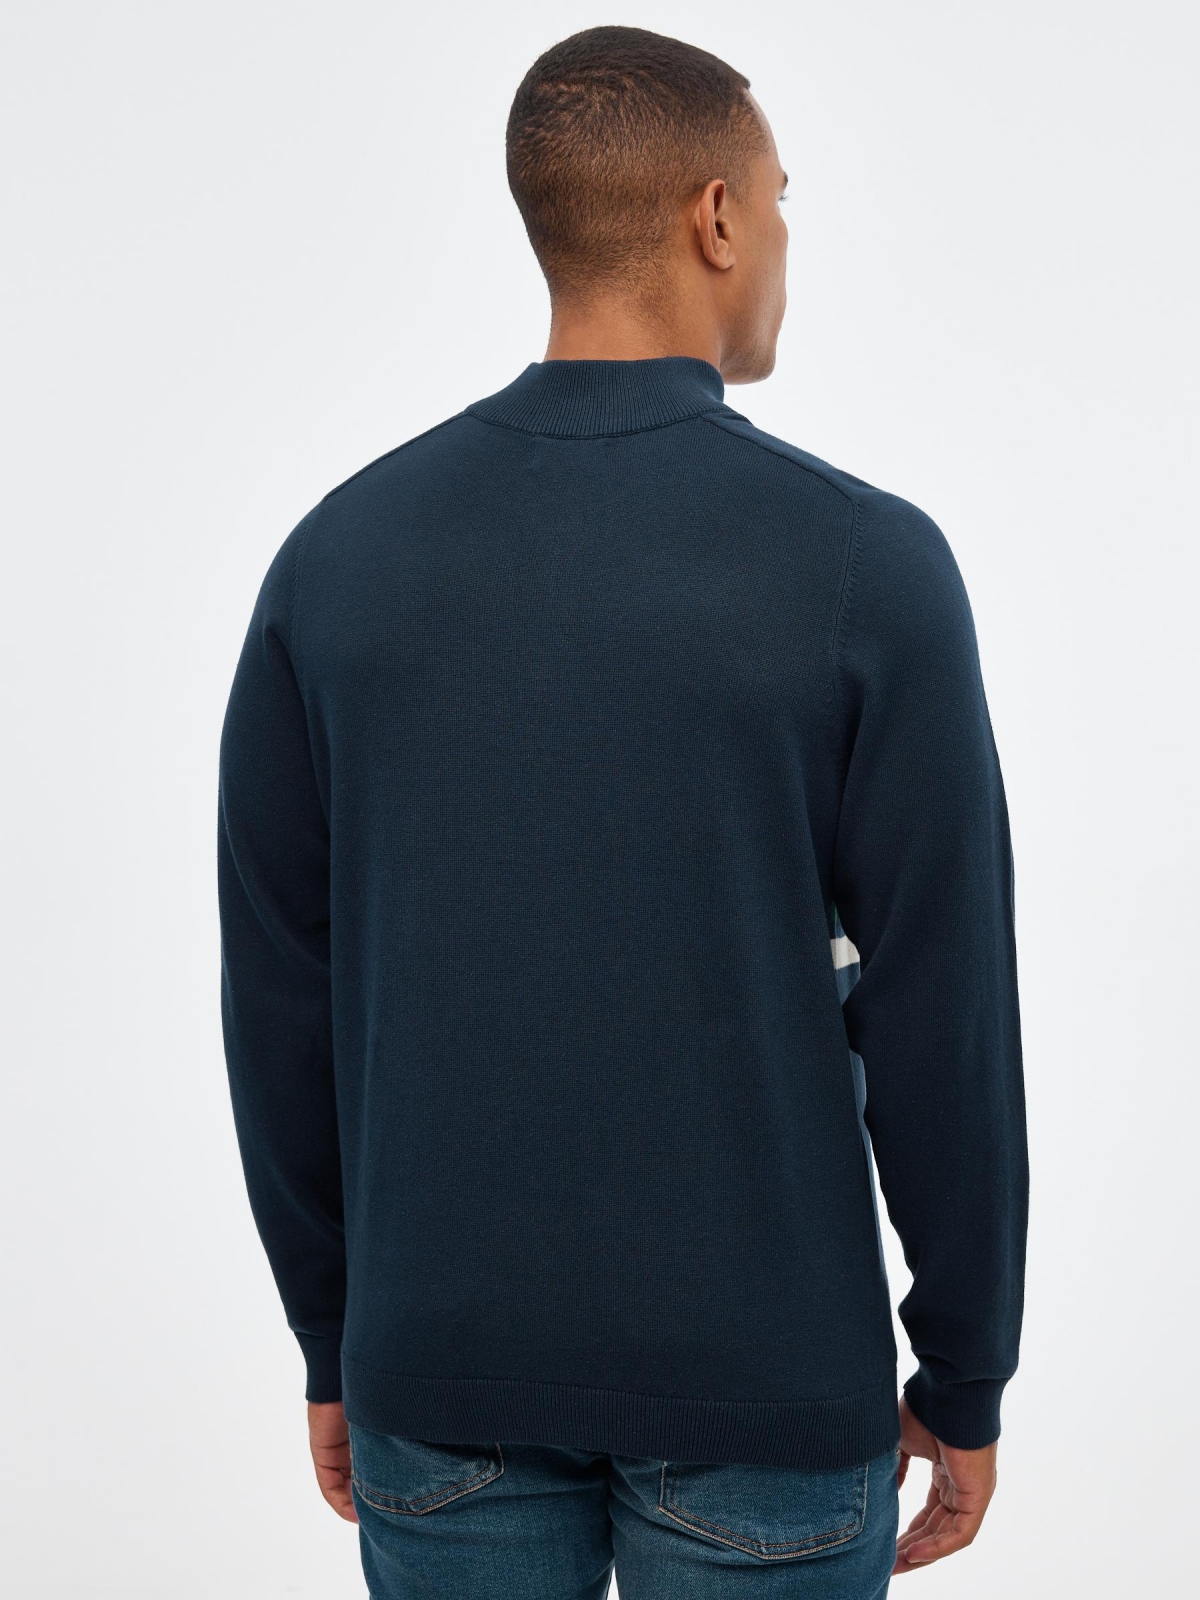 Zipper neck sweater navy middle back view